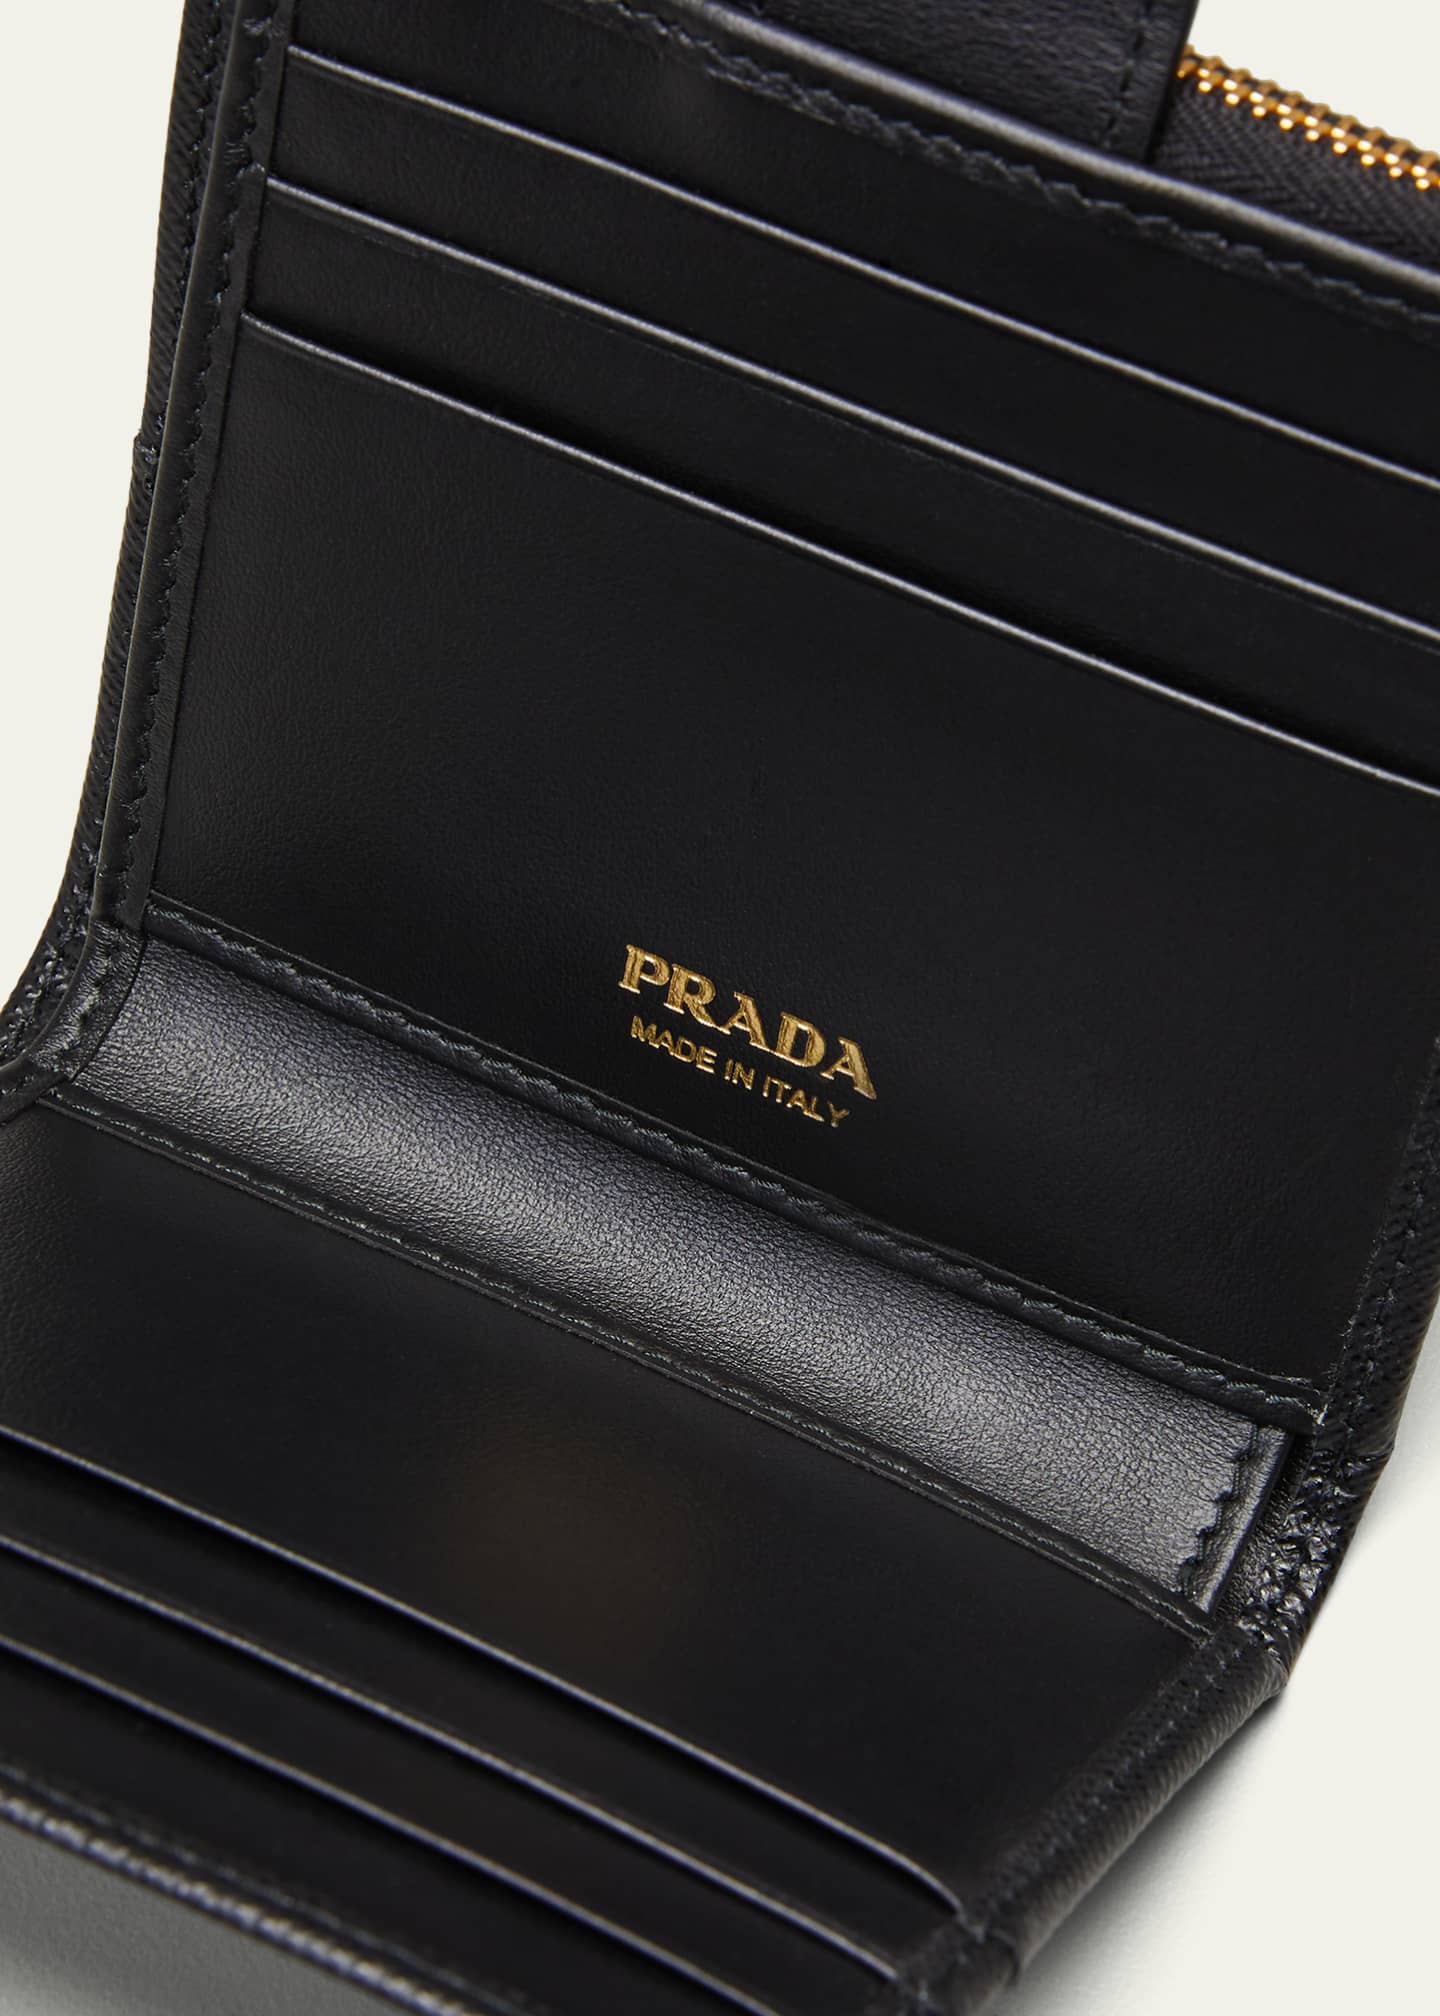 PRADA Saffiano Leather Long Wallet White - 15% OFF